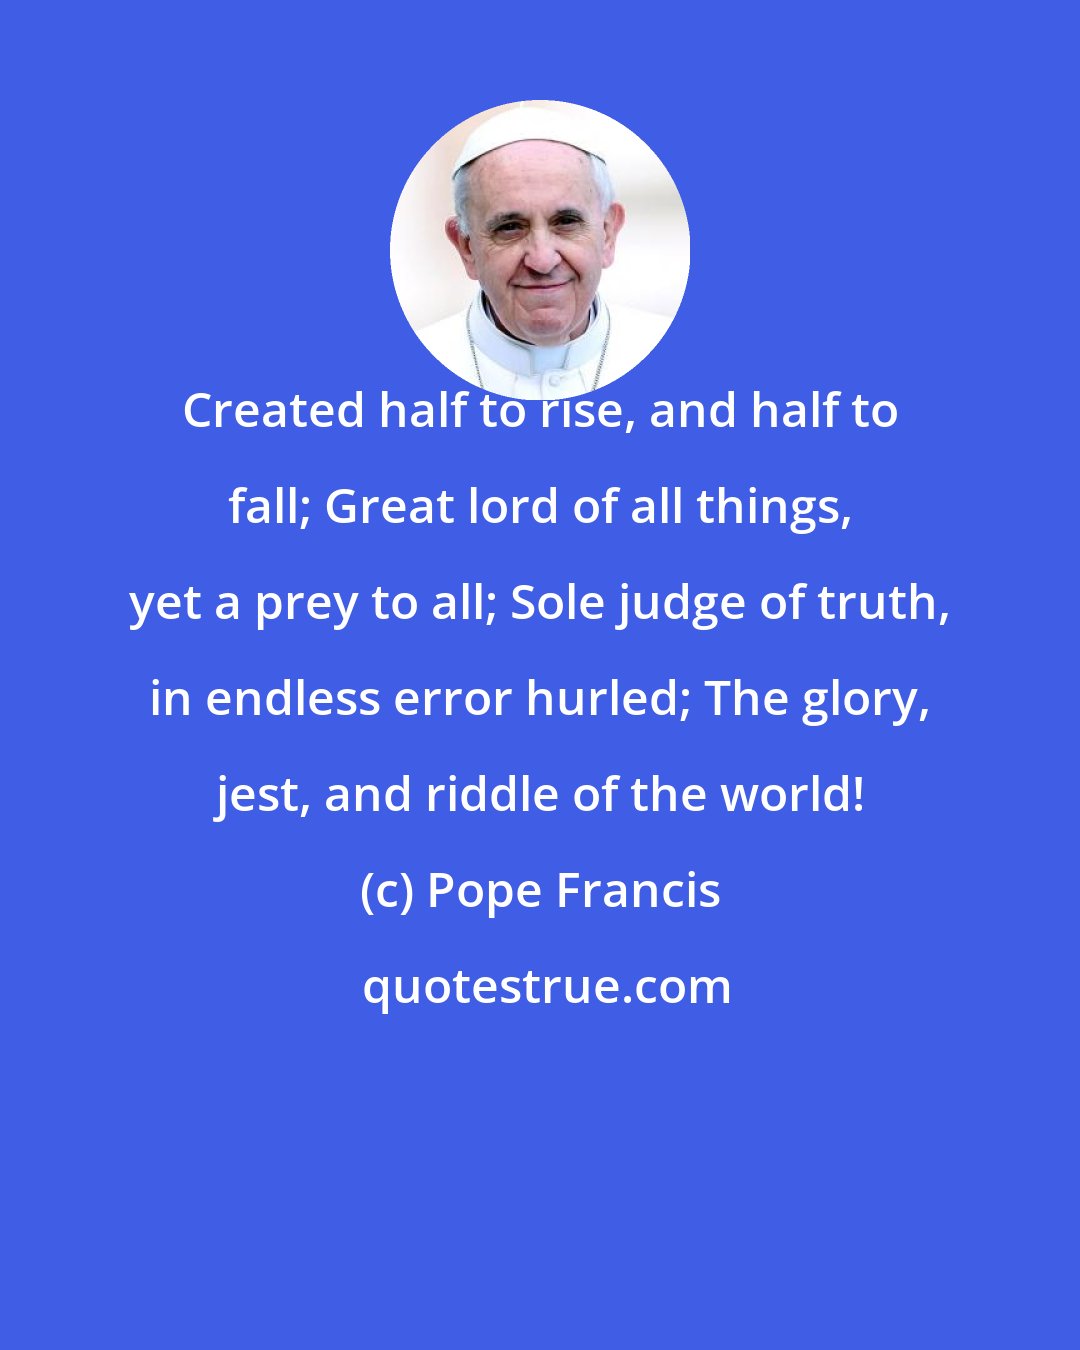 Pope Francis: Created half to rise, and half to fall; Great lord of all things, yet a prey to all; Sole judge of truth, in endless error hurled; The glory, jest, and riddle of the world!